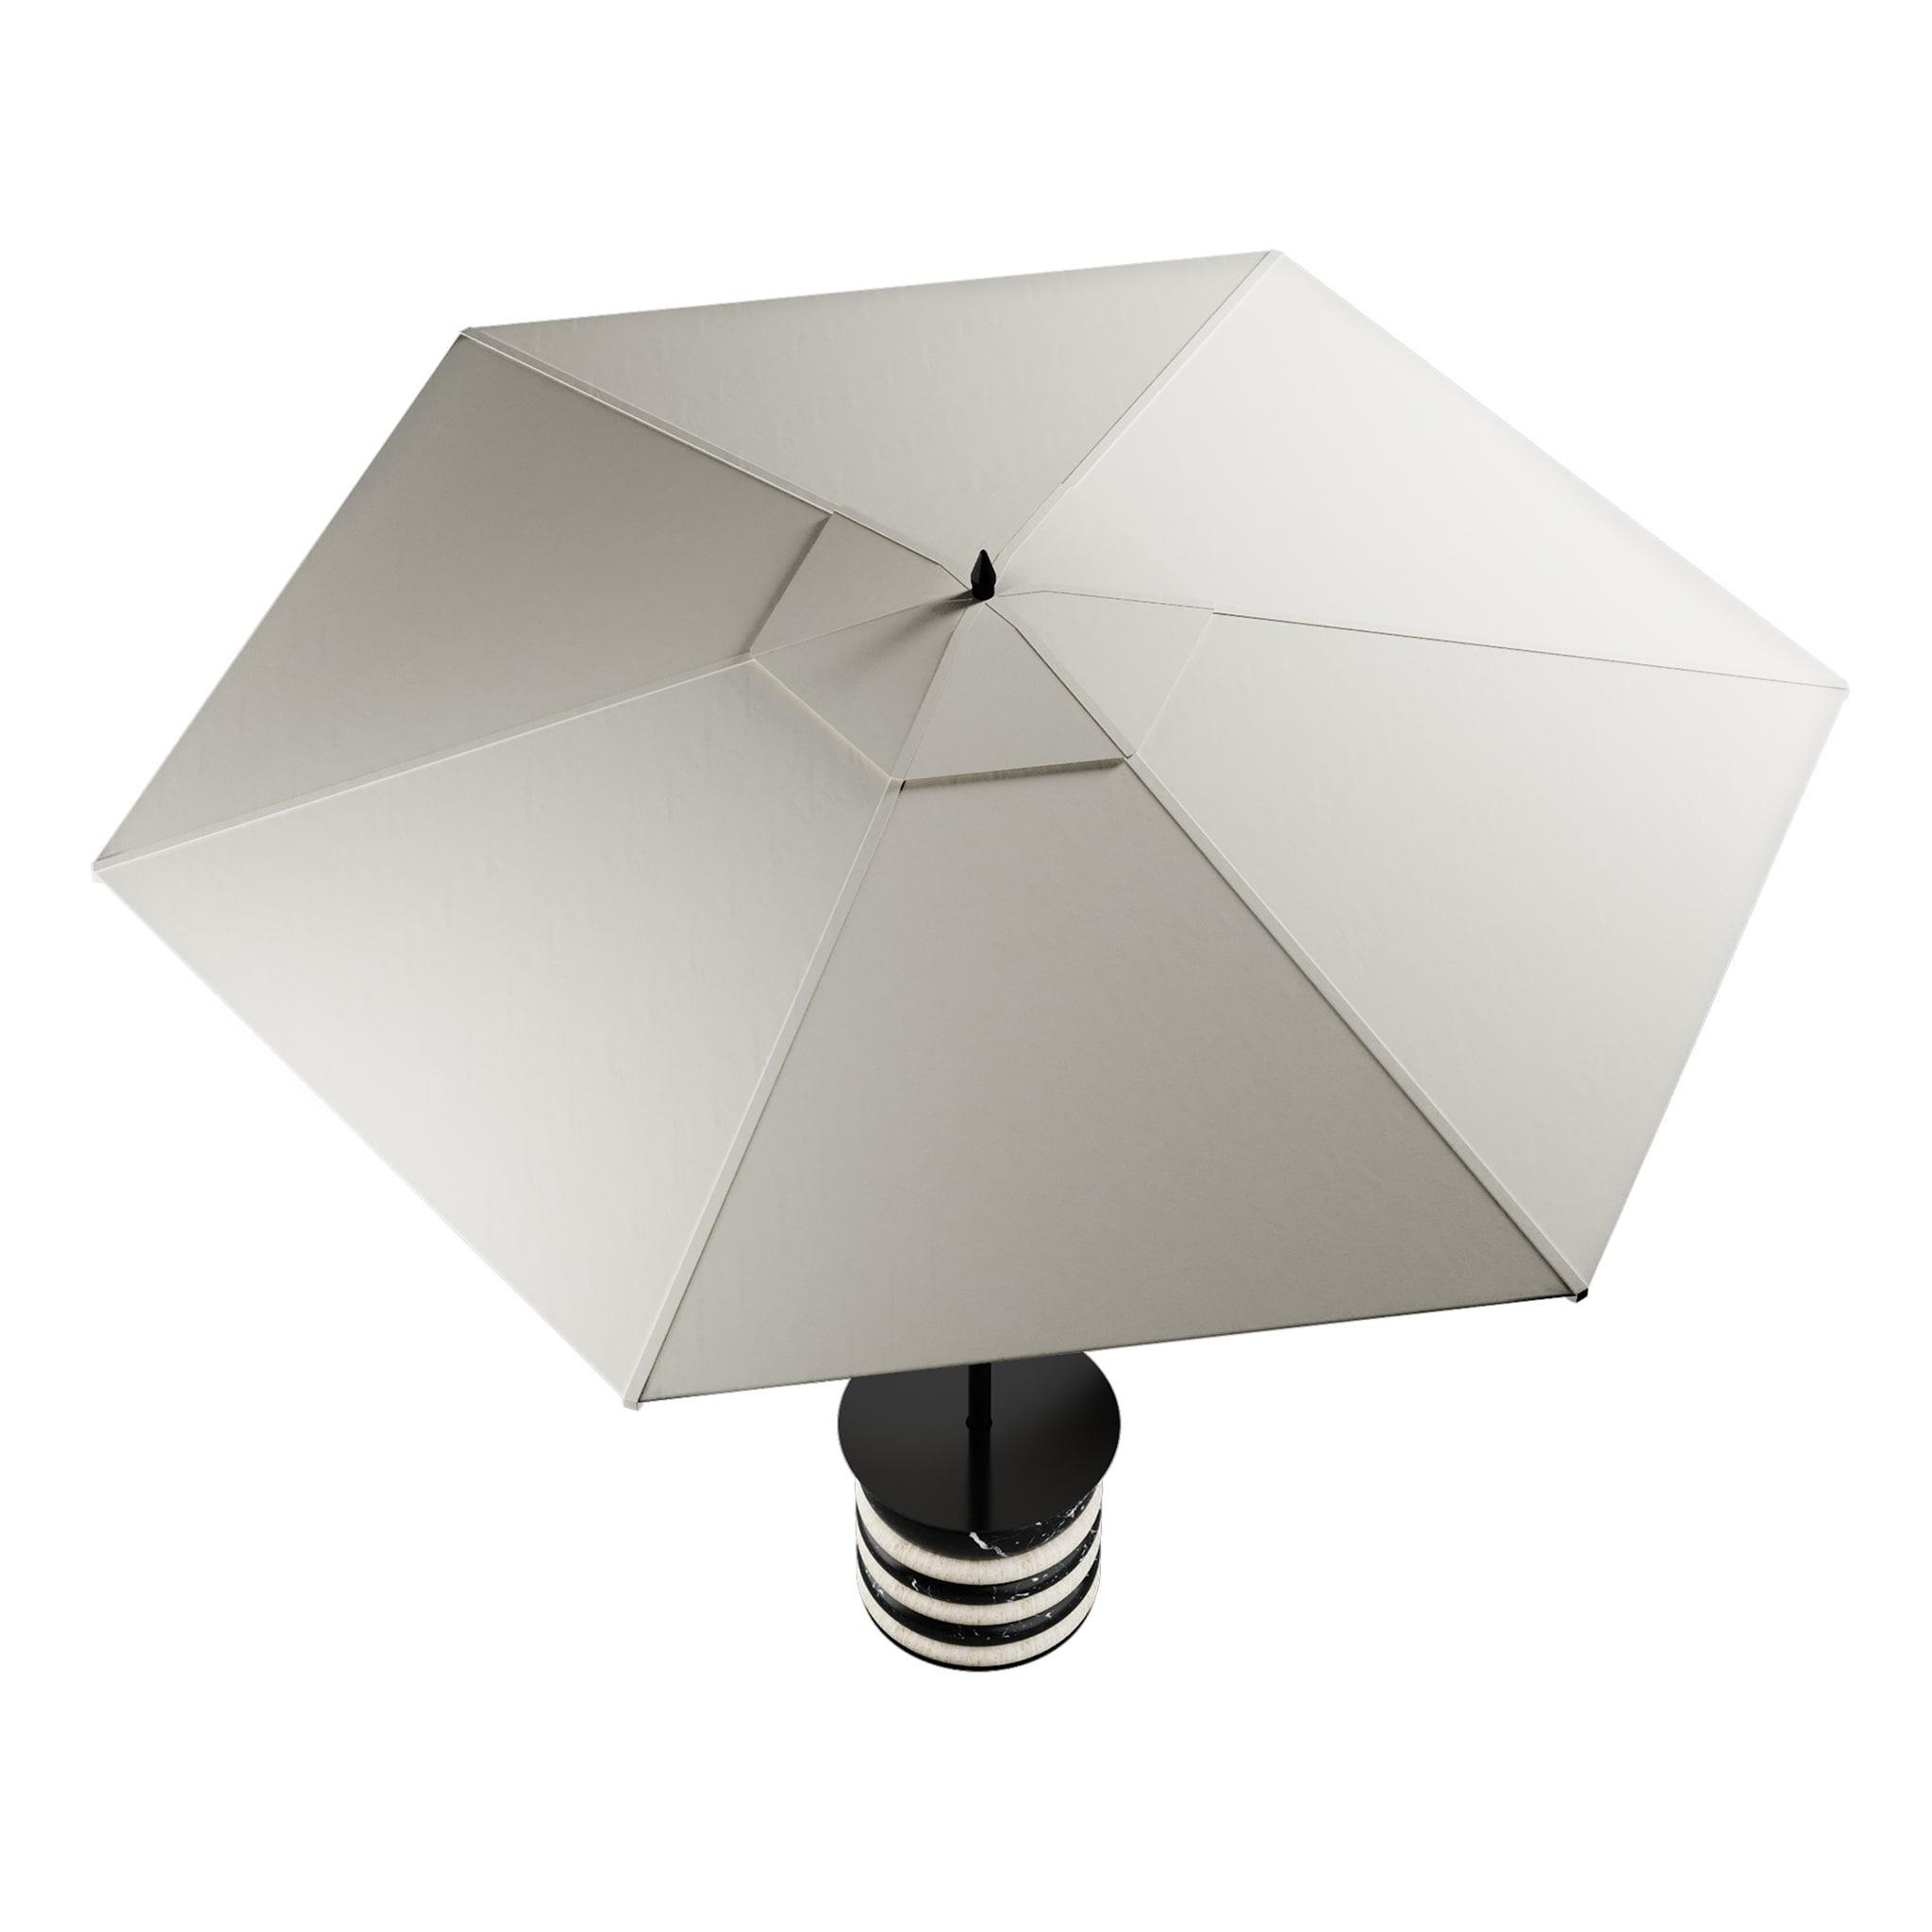 Contemporary black&white parasol & base with outdoor fabric, body in green marble

Elektra Parasol White is designed for modern outdoors. A multifunctional parasol in travertine and nero marquina marble that can be turned into a side